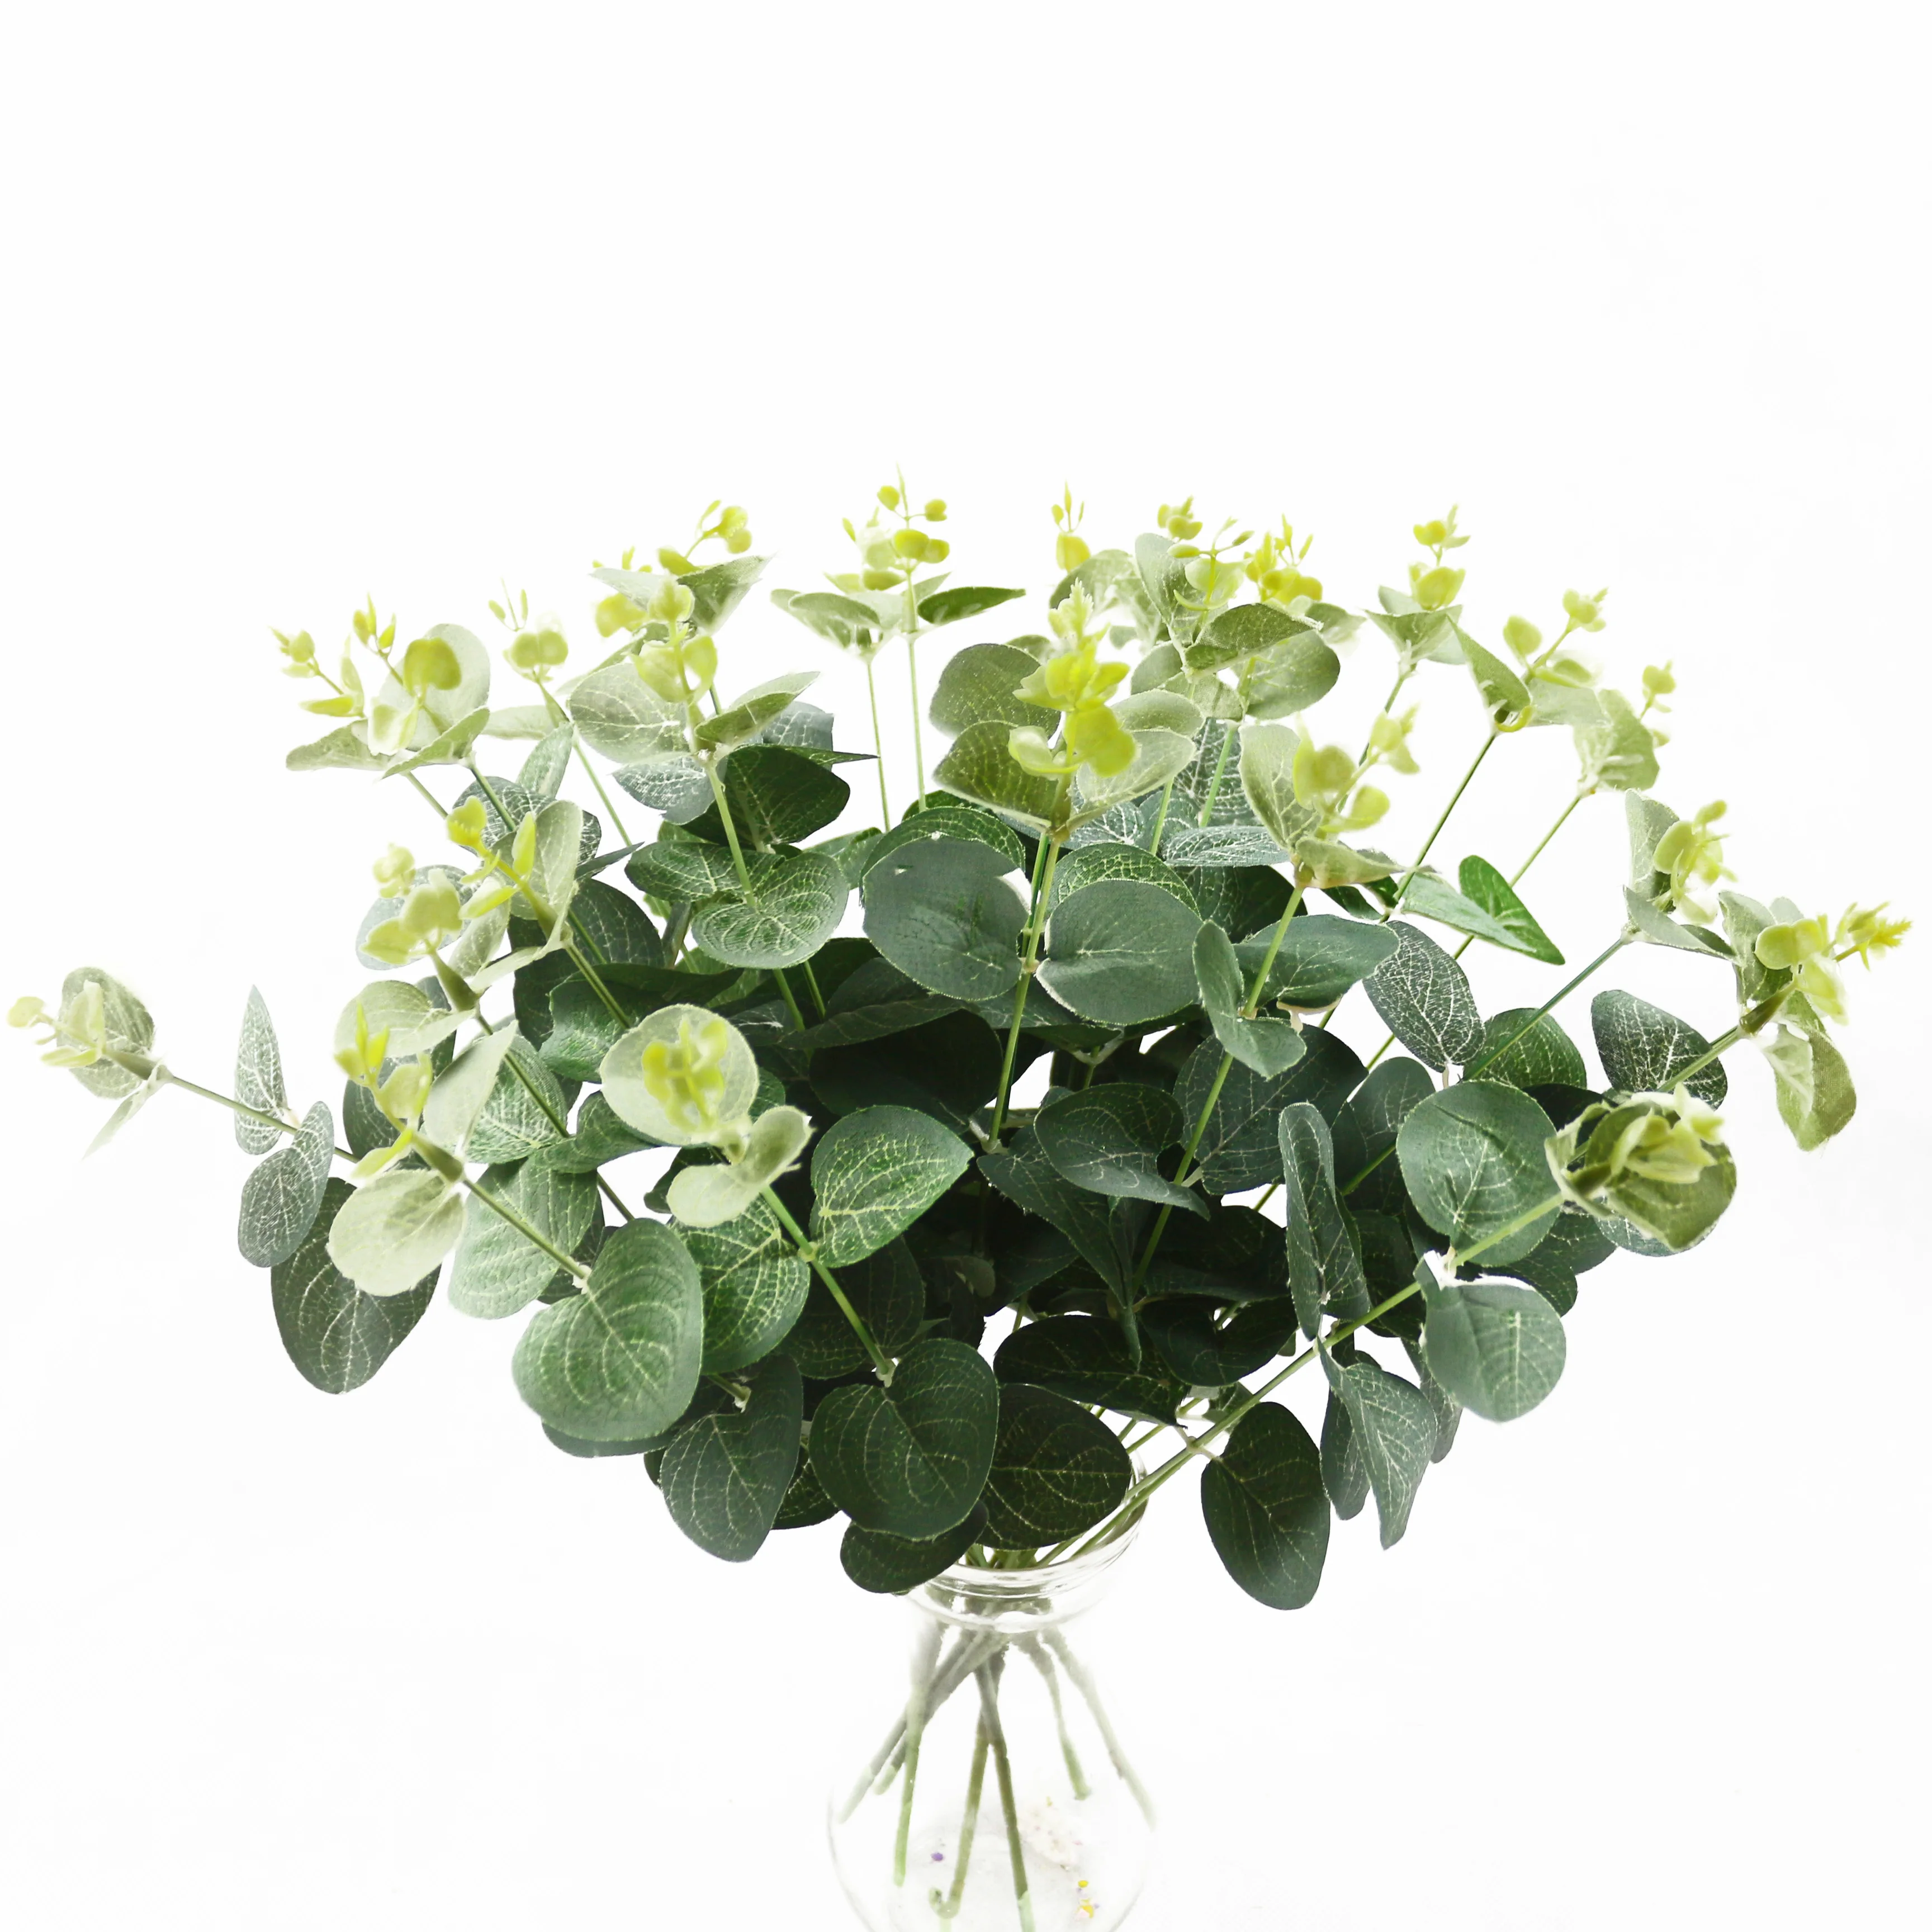 NEW Artifical Fake Silk Eucalyptus Green Plant Leaves Flowers Home Party Decor 